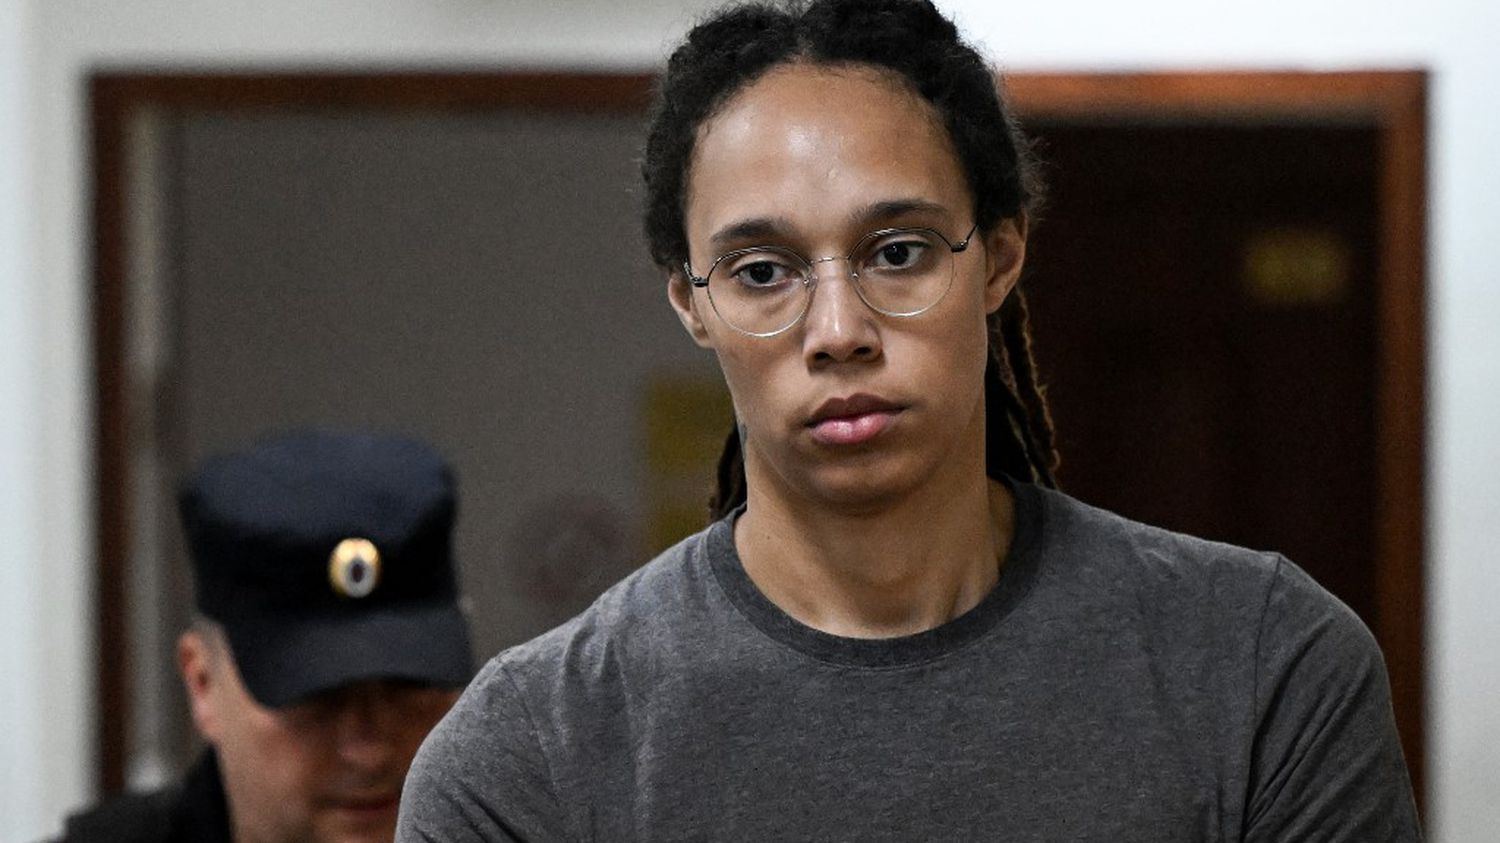 American basketball player Brittney Griner was freed by Russia in a prisoner swap between Washington and Moscow
